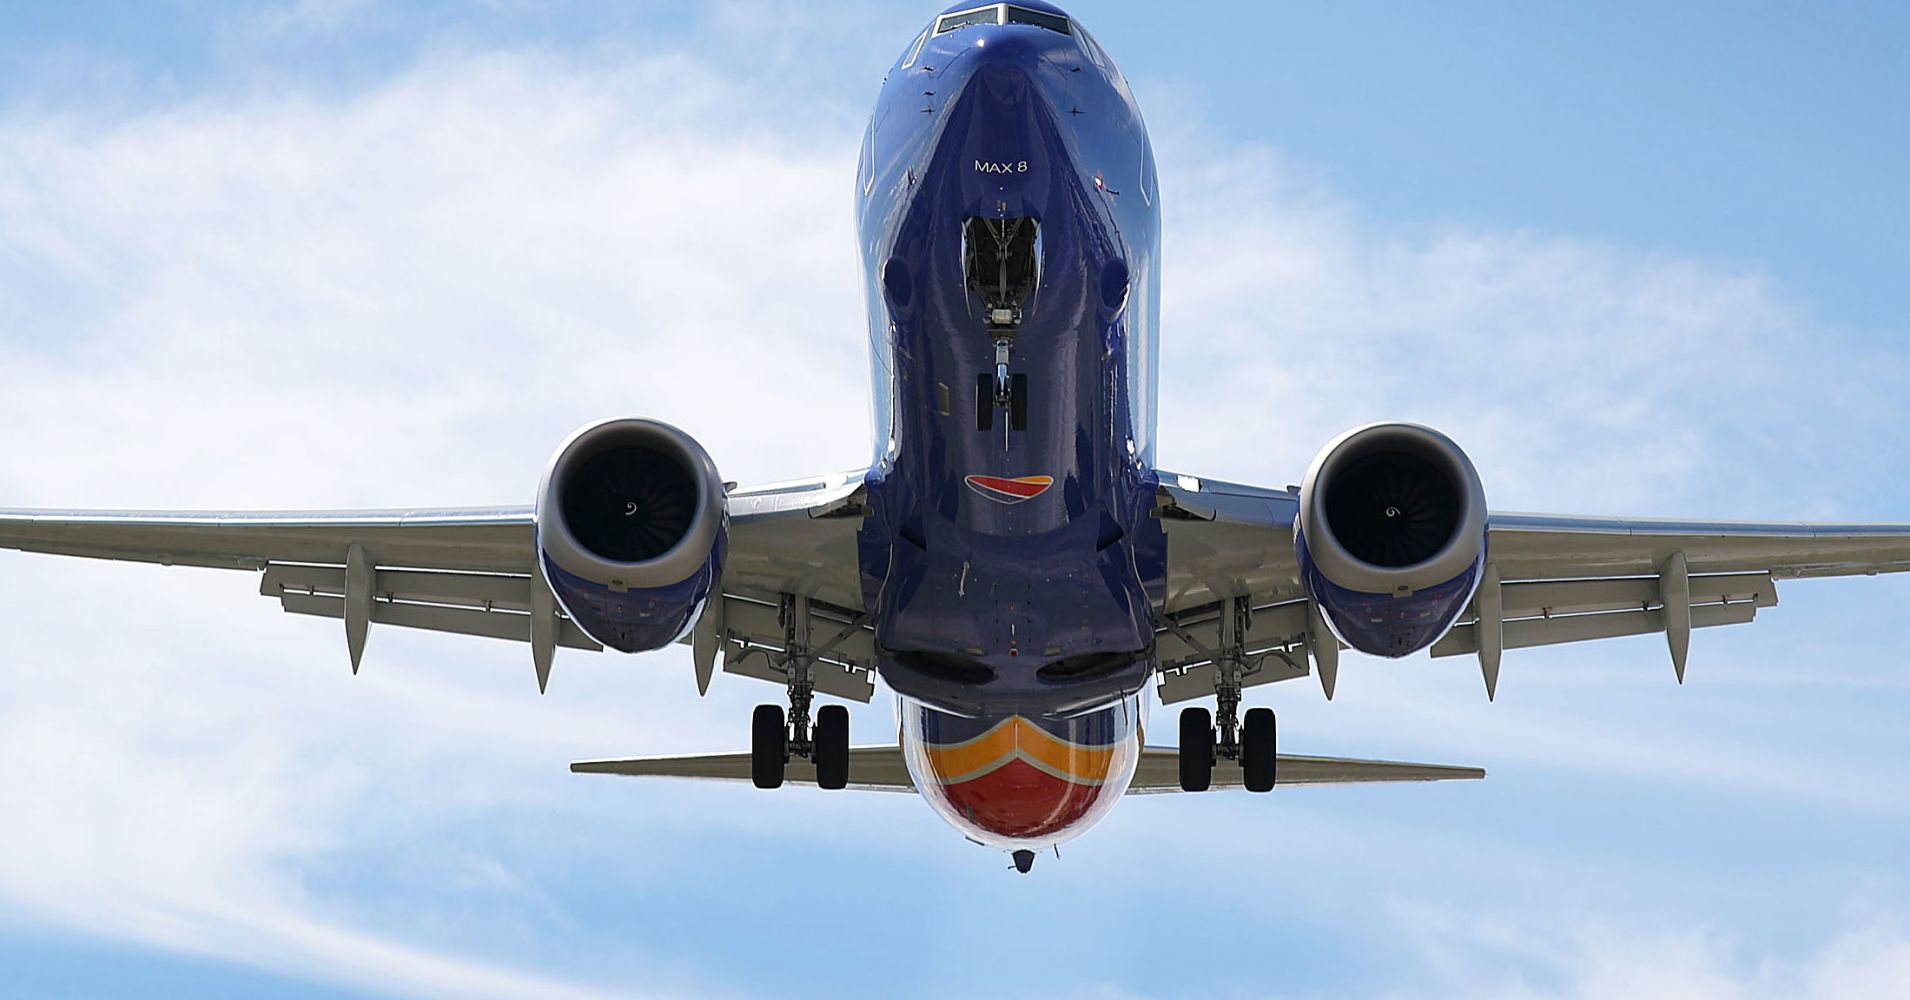 A Southwest Boeing 737 Max 8 enroute from Tampa prepares to land at Fort Lauderdale-Hollywood International Airport on March 11, 2019.